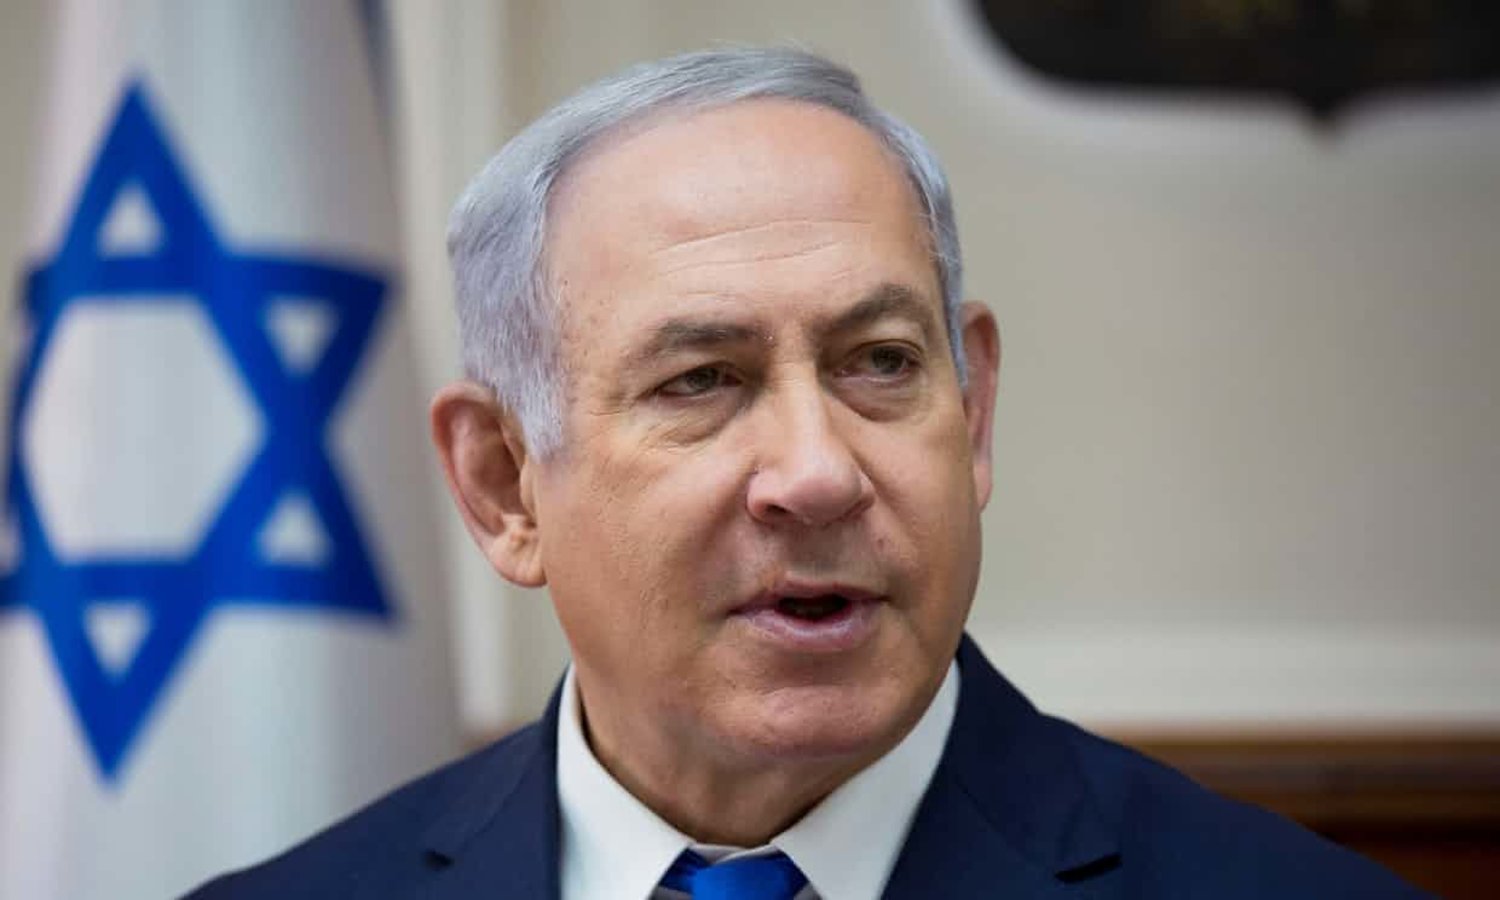 Israeli Prime Minister Benjamin Netanyahu is a suspect in two cases being investigated. Photograph: Reuters